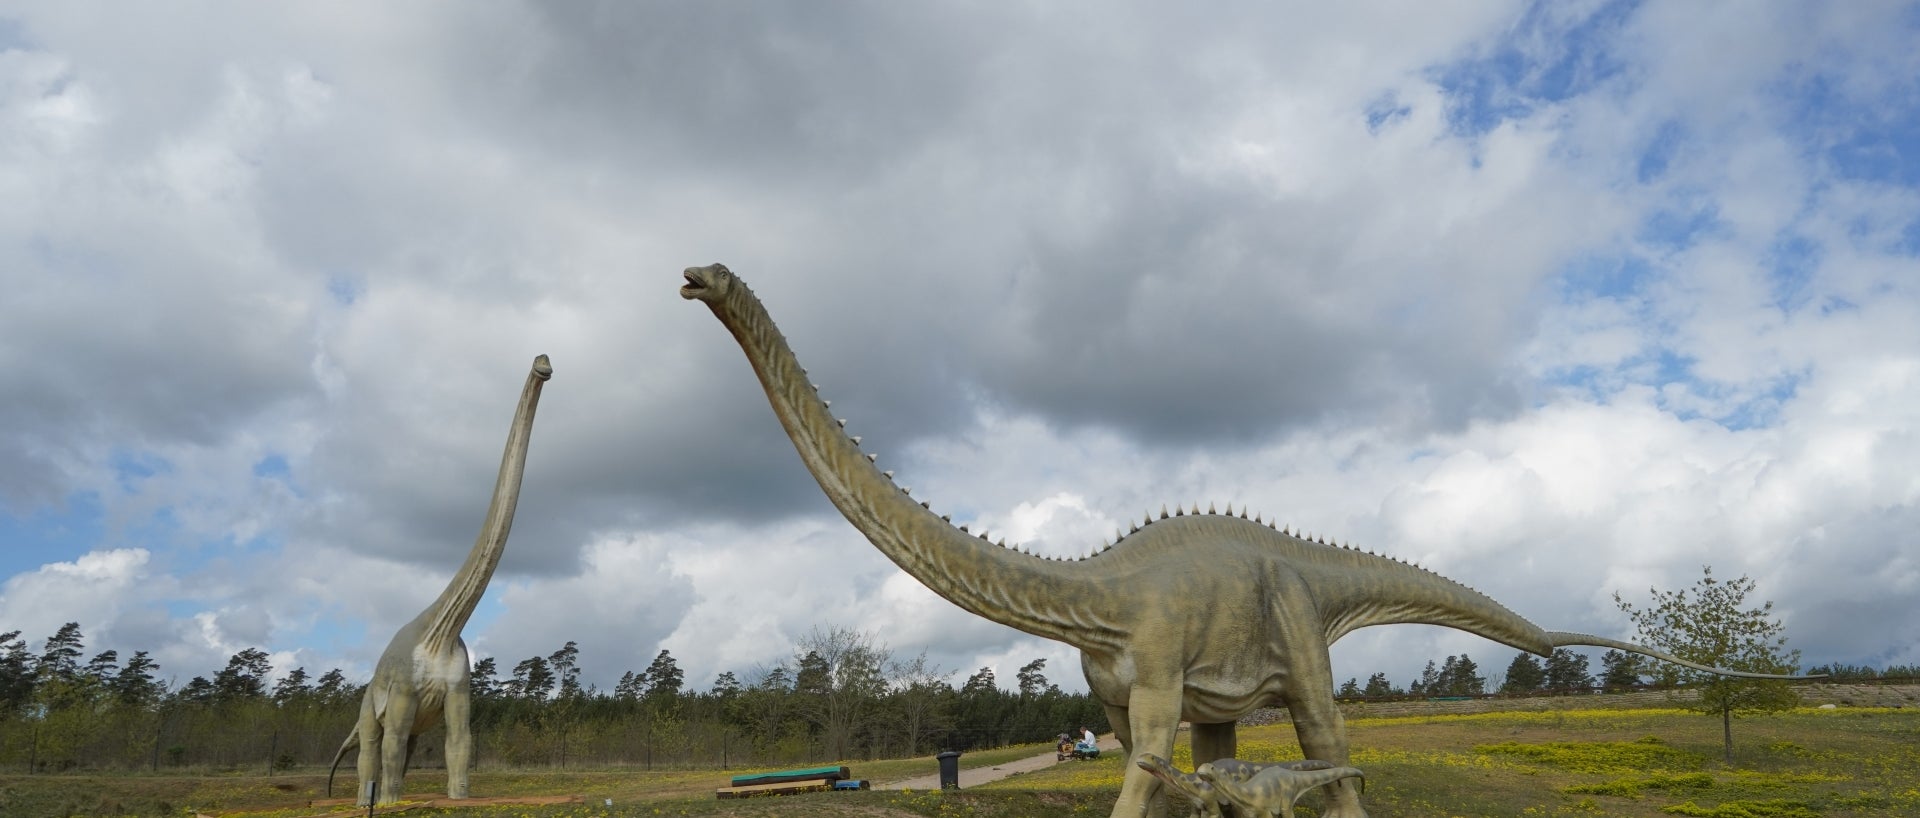 Two sauropods in a Dinosaur park